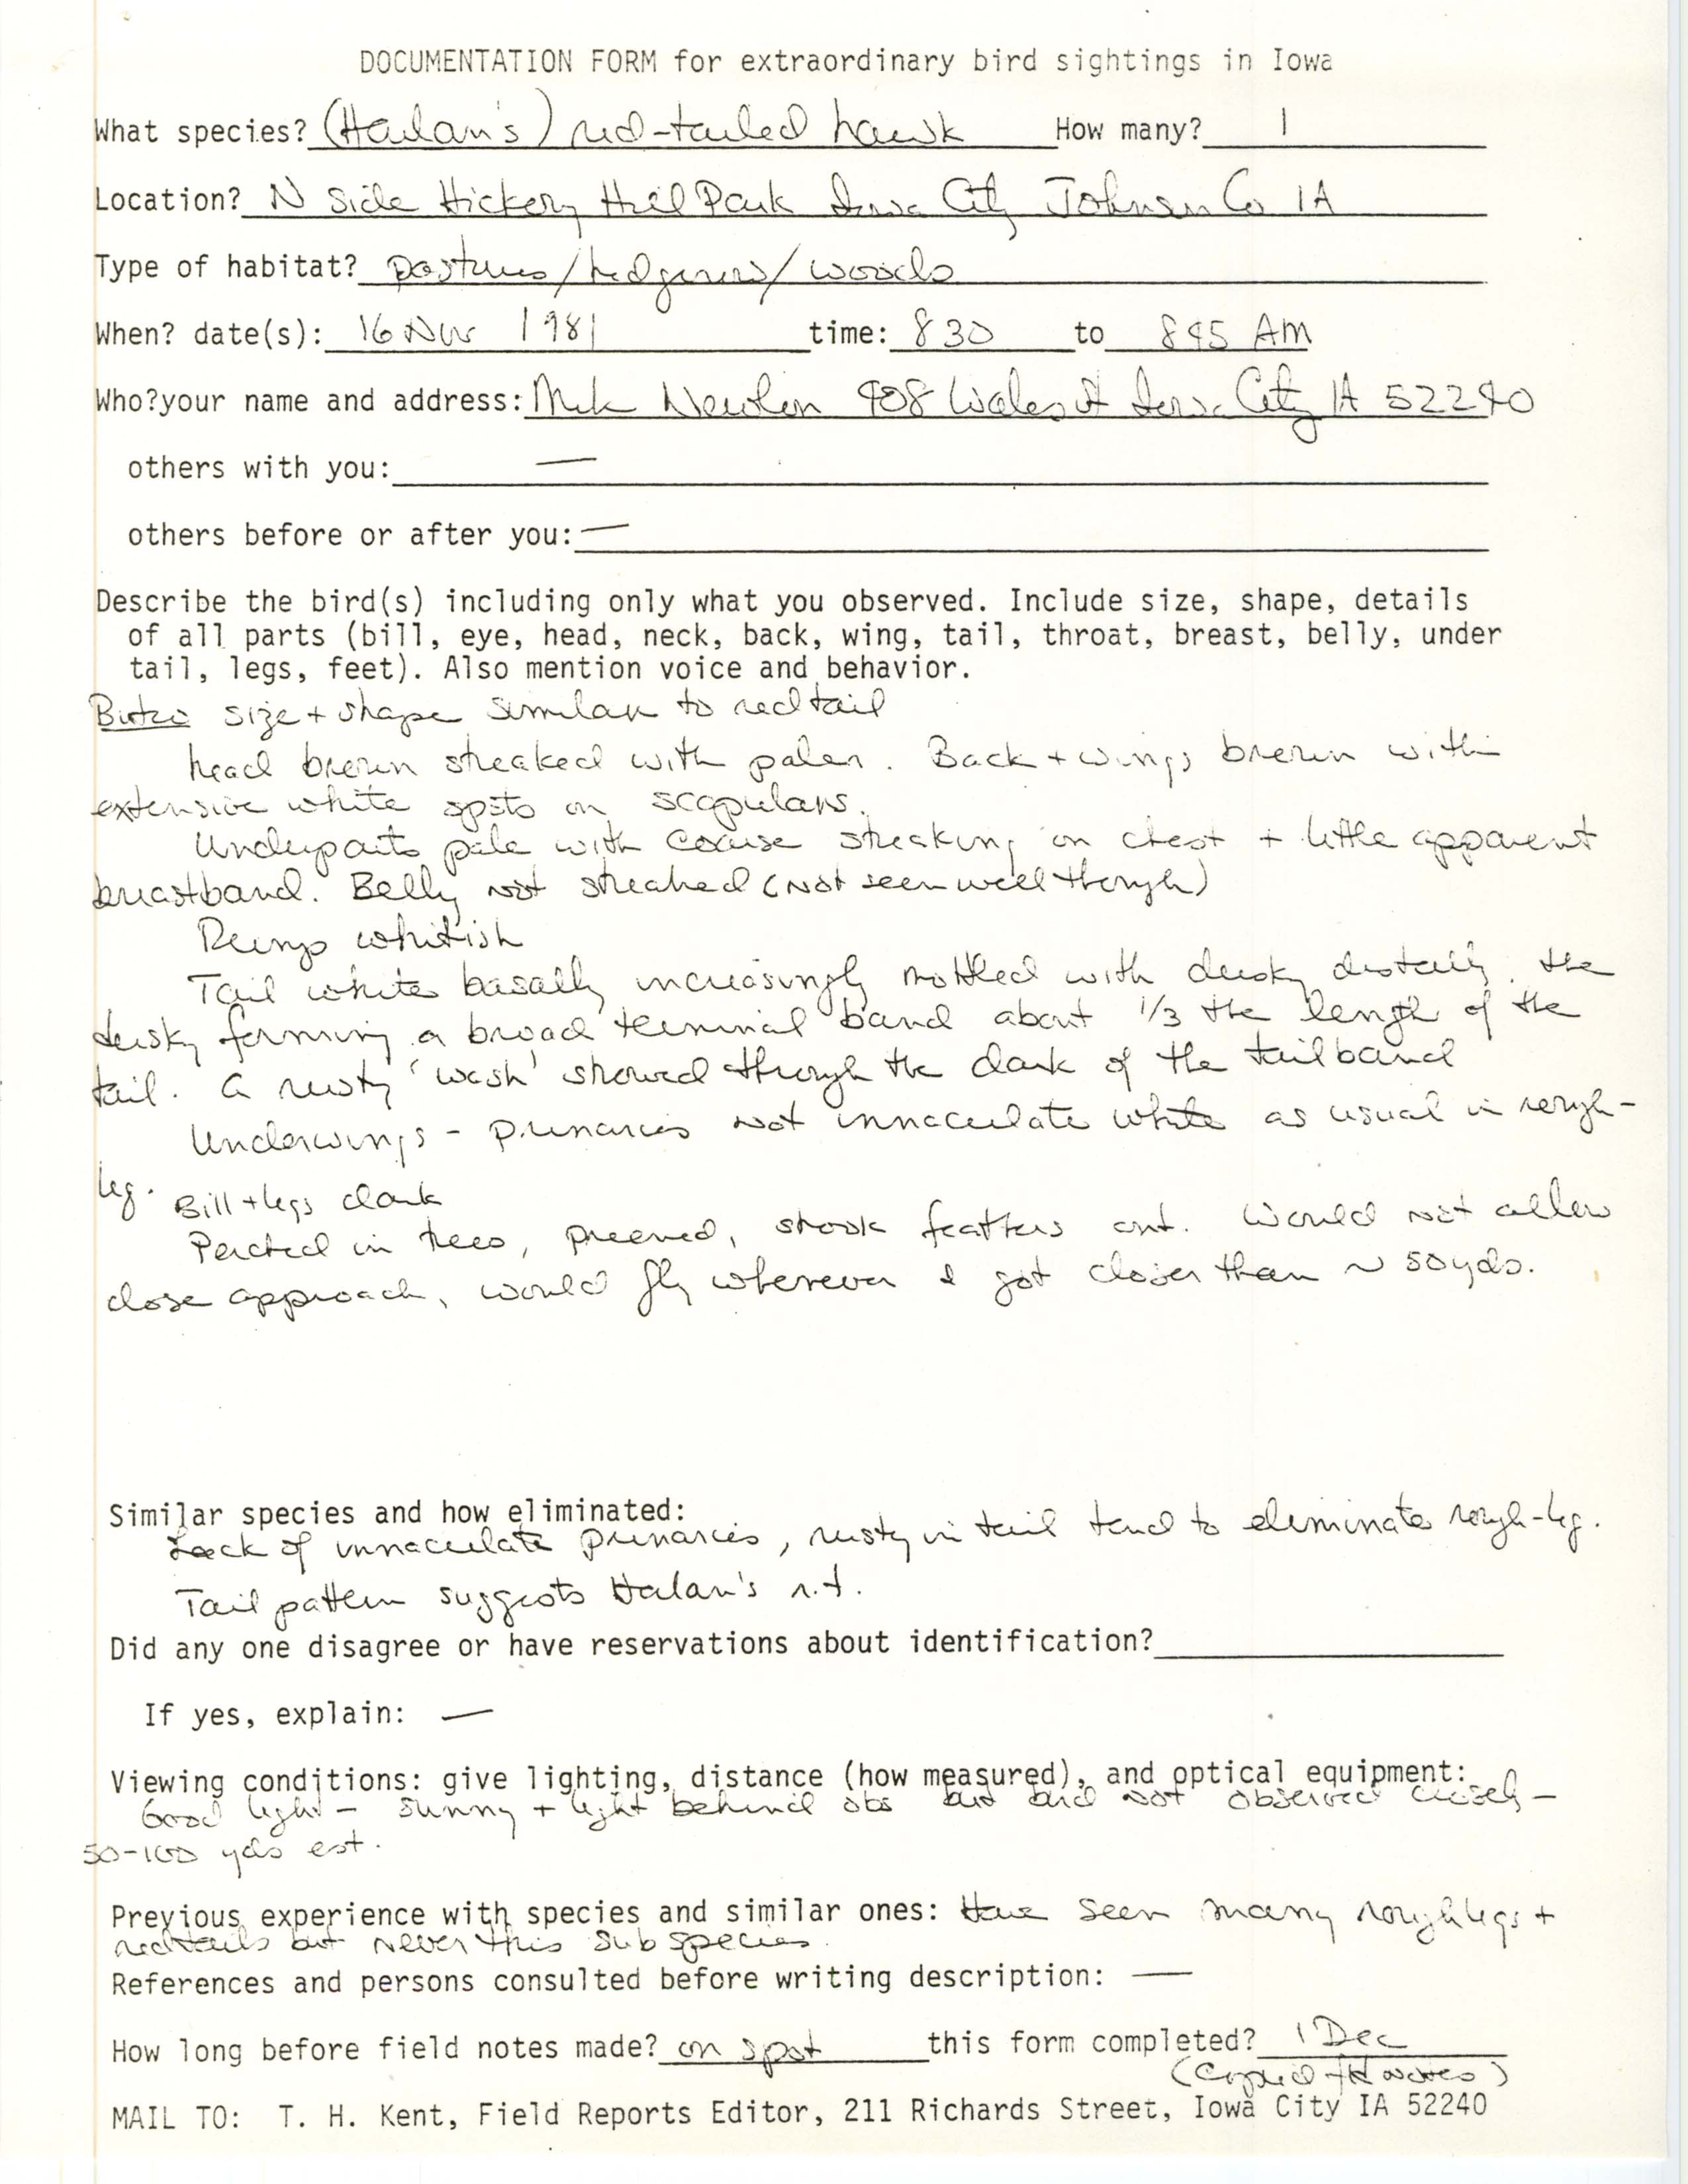 Rare bird documentation form for Red-tailed Hawk at Hickory Hill Park, 1981